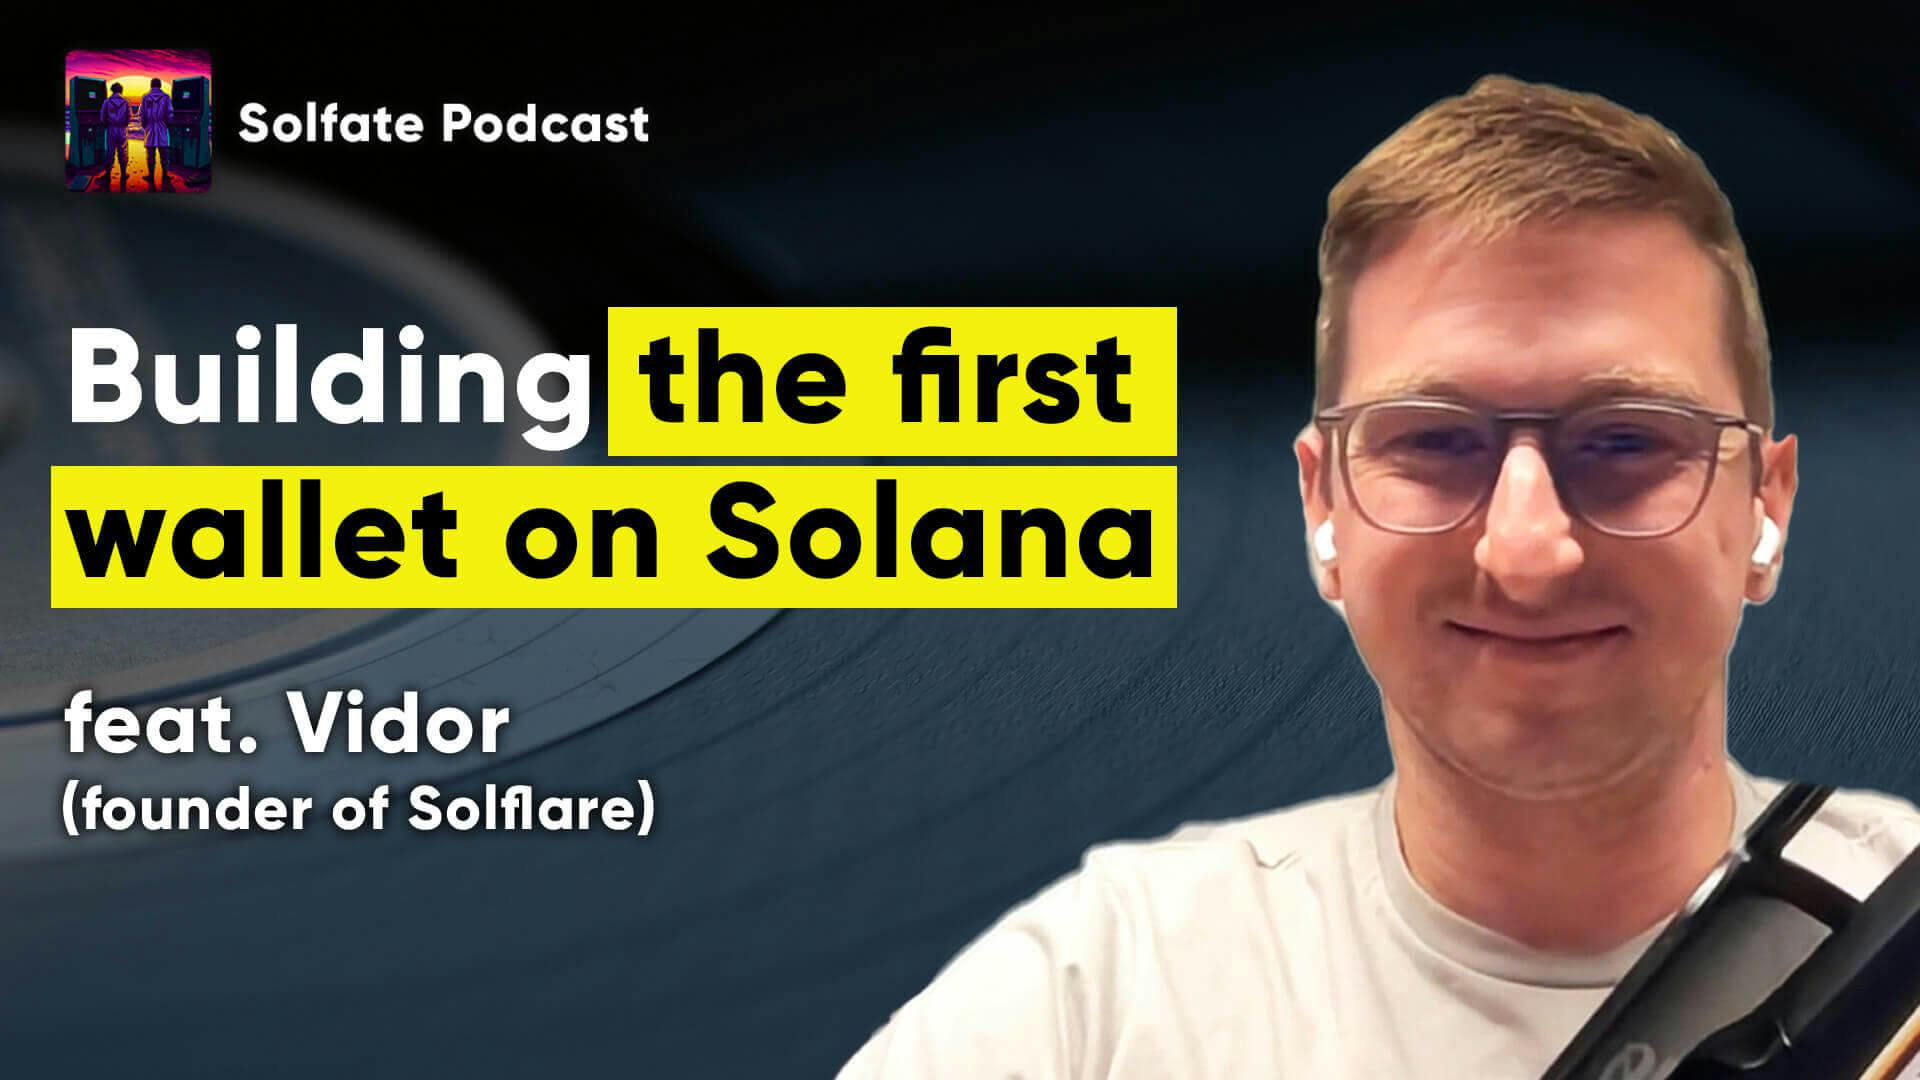 Building Solflare: the first wallet on Solana